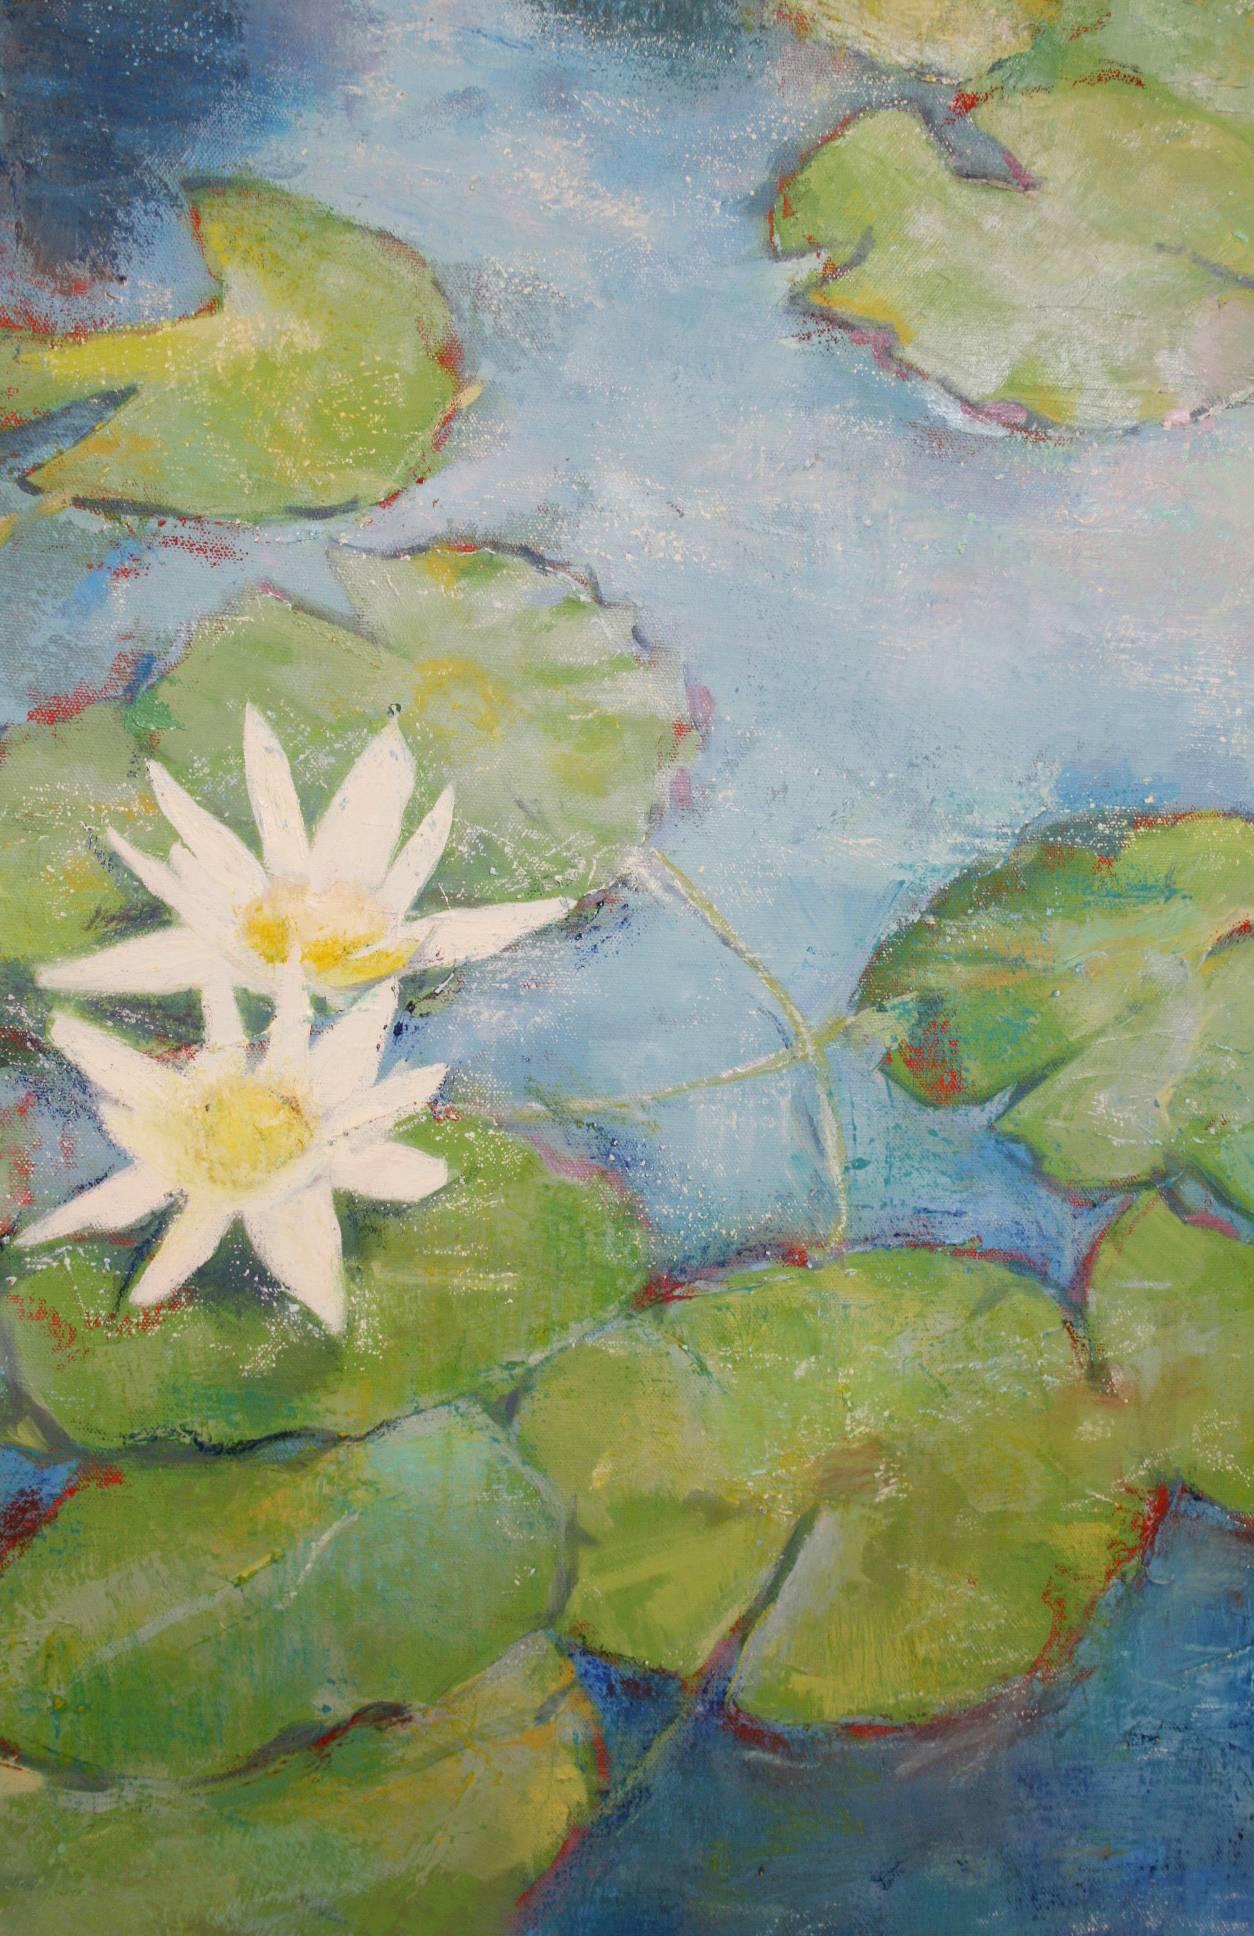 Lily pads, 3, ice blue, Impressionist, impressionism, turquoise, green, flower, water lily, water lilies, Monet, nature, calm, relaxing, tranquil, triptych, classic, transitional, romantic, soft, delicate.

Miranda Girard is an exhibiting and